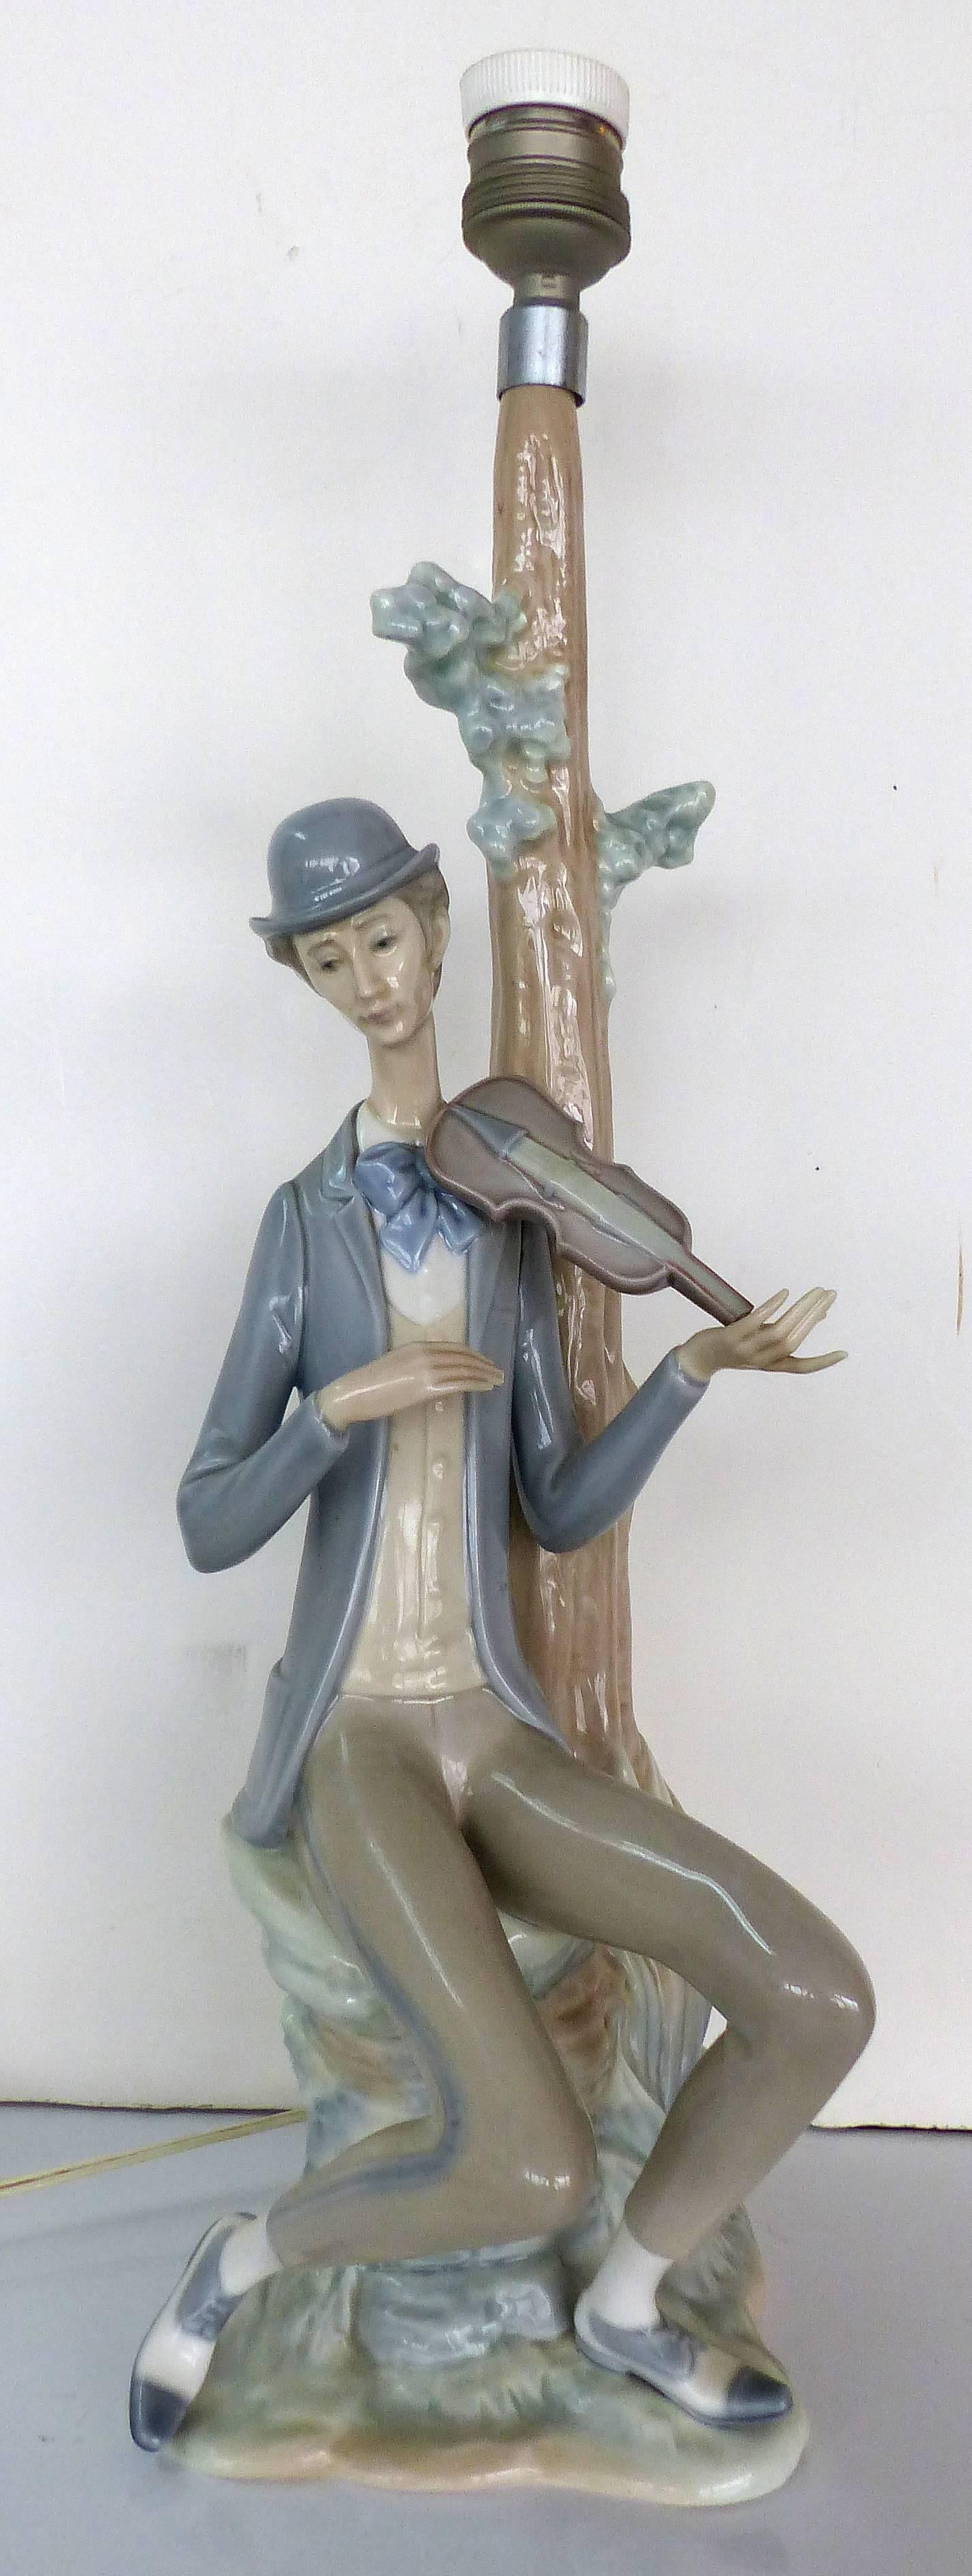 
A rare pair of table lamps by Vicente Martínez for Lladro. The boy playing a violin and the girl playing a mandolin are a matched pair and include the original Lladro shades. They are fully marked on the bases. The boy figure has losses to a